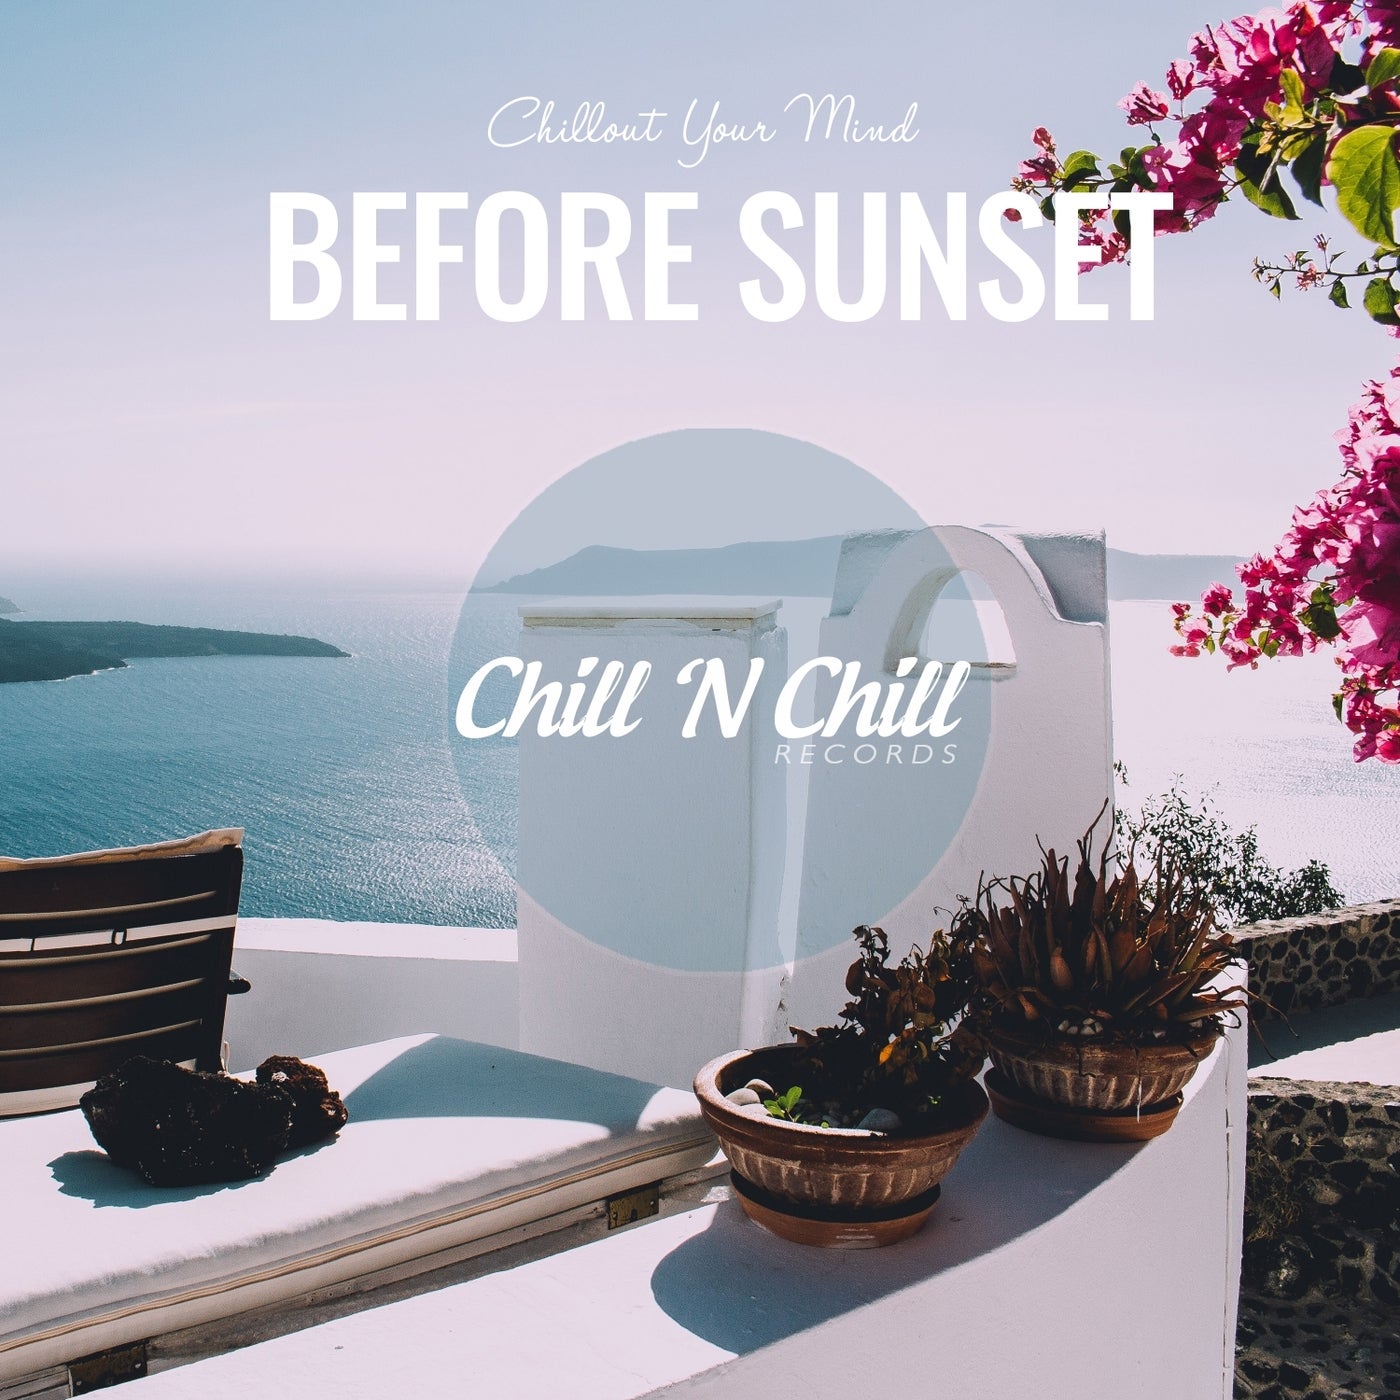 Before Sunset: Chillout Your Mind